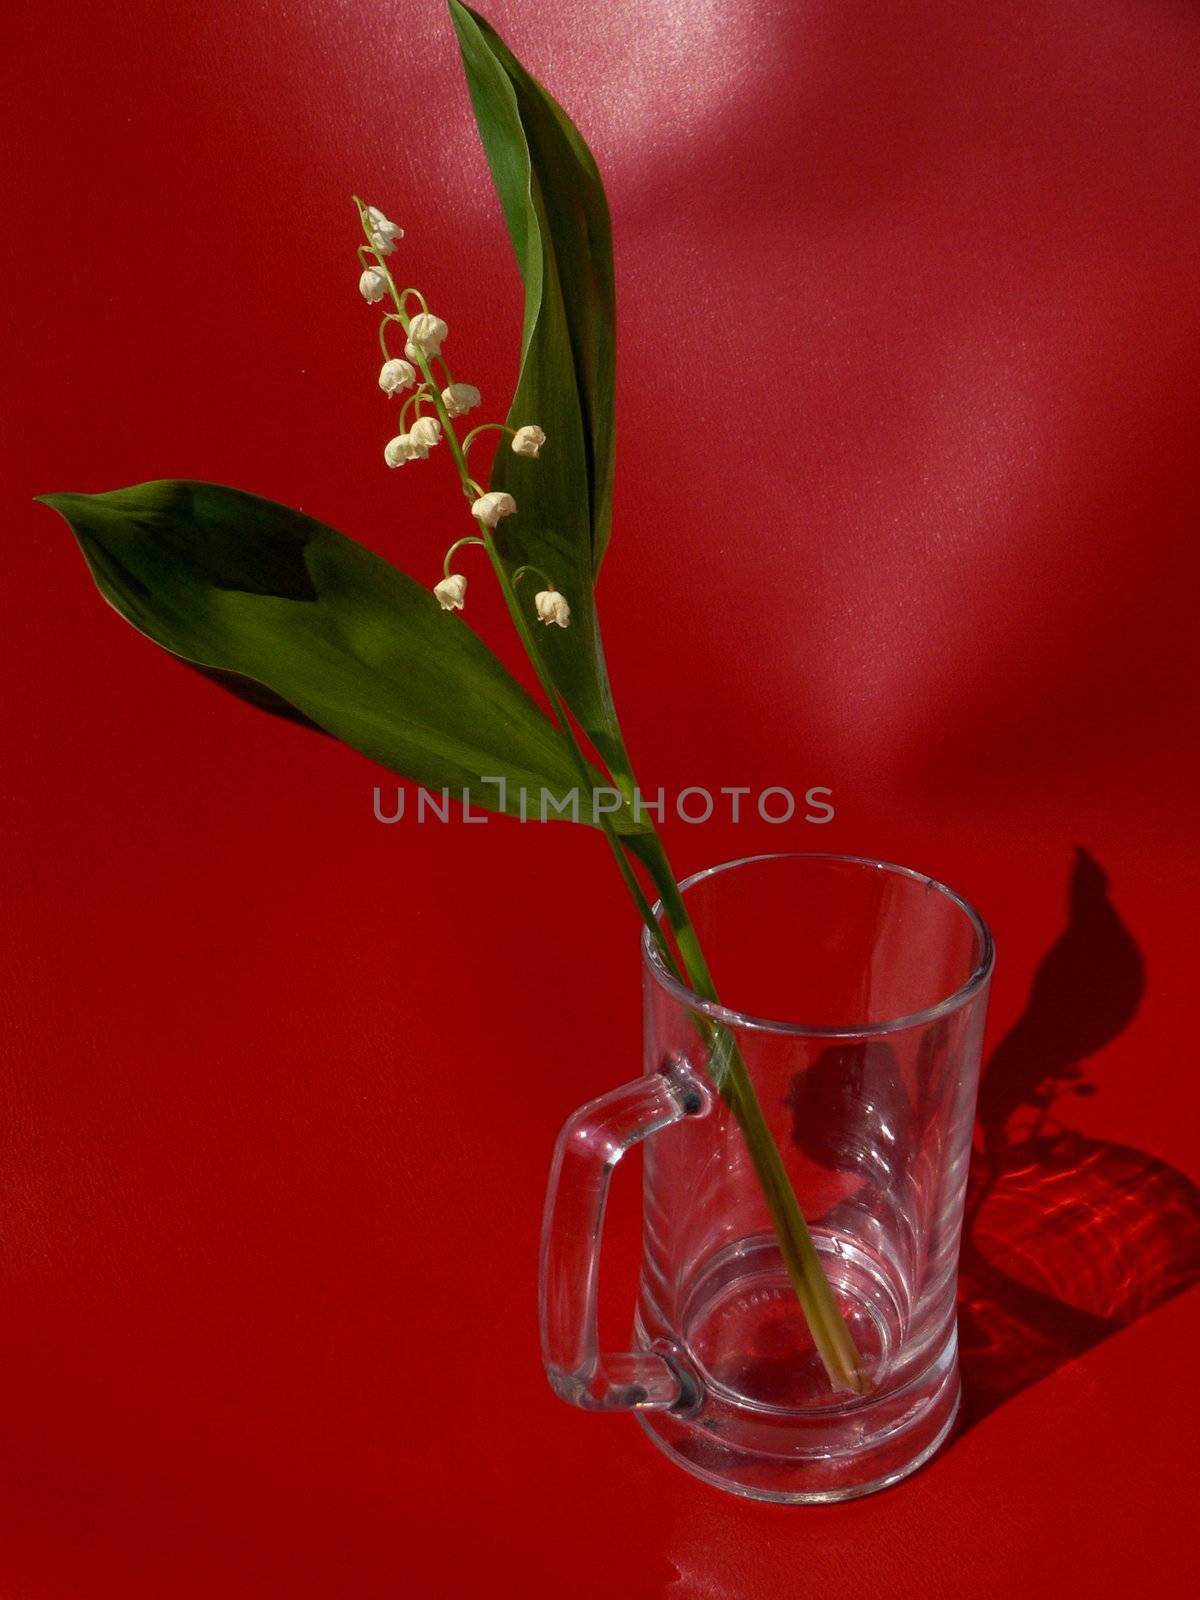 Lily of the valley on red background